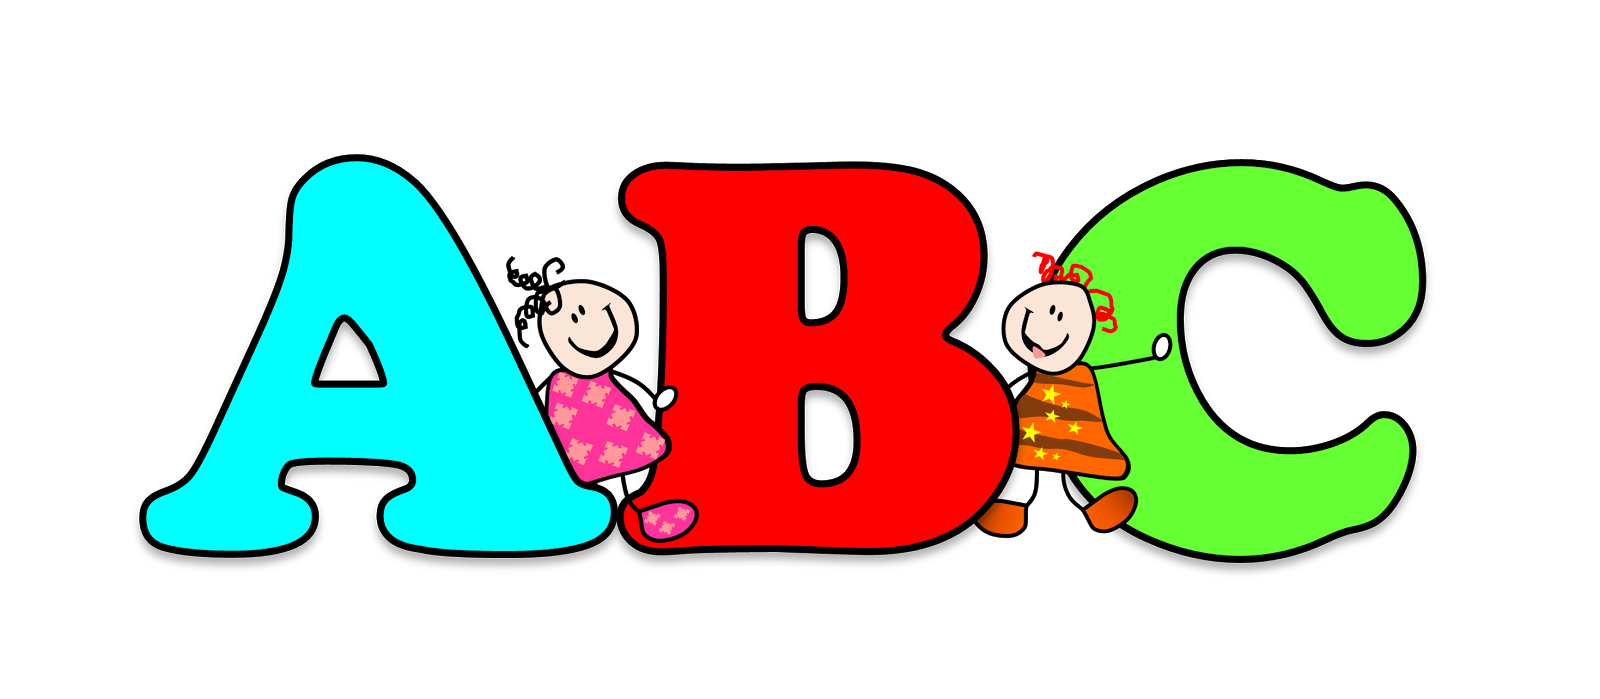 The Letter B - Year 6 - Quizizz